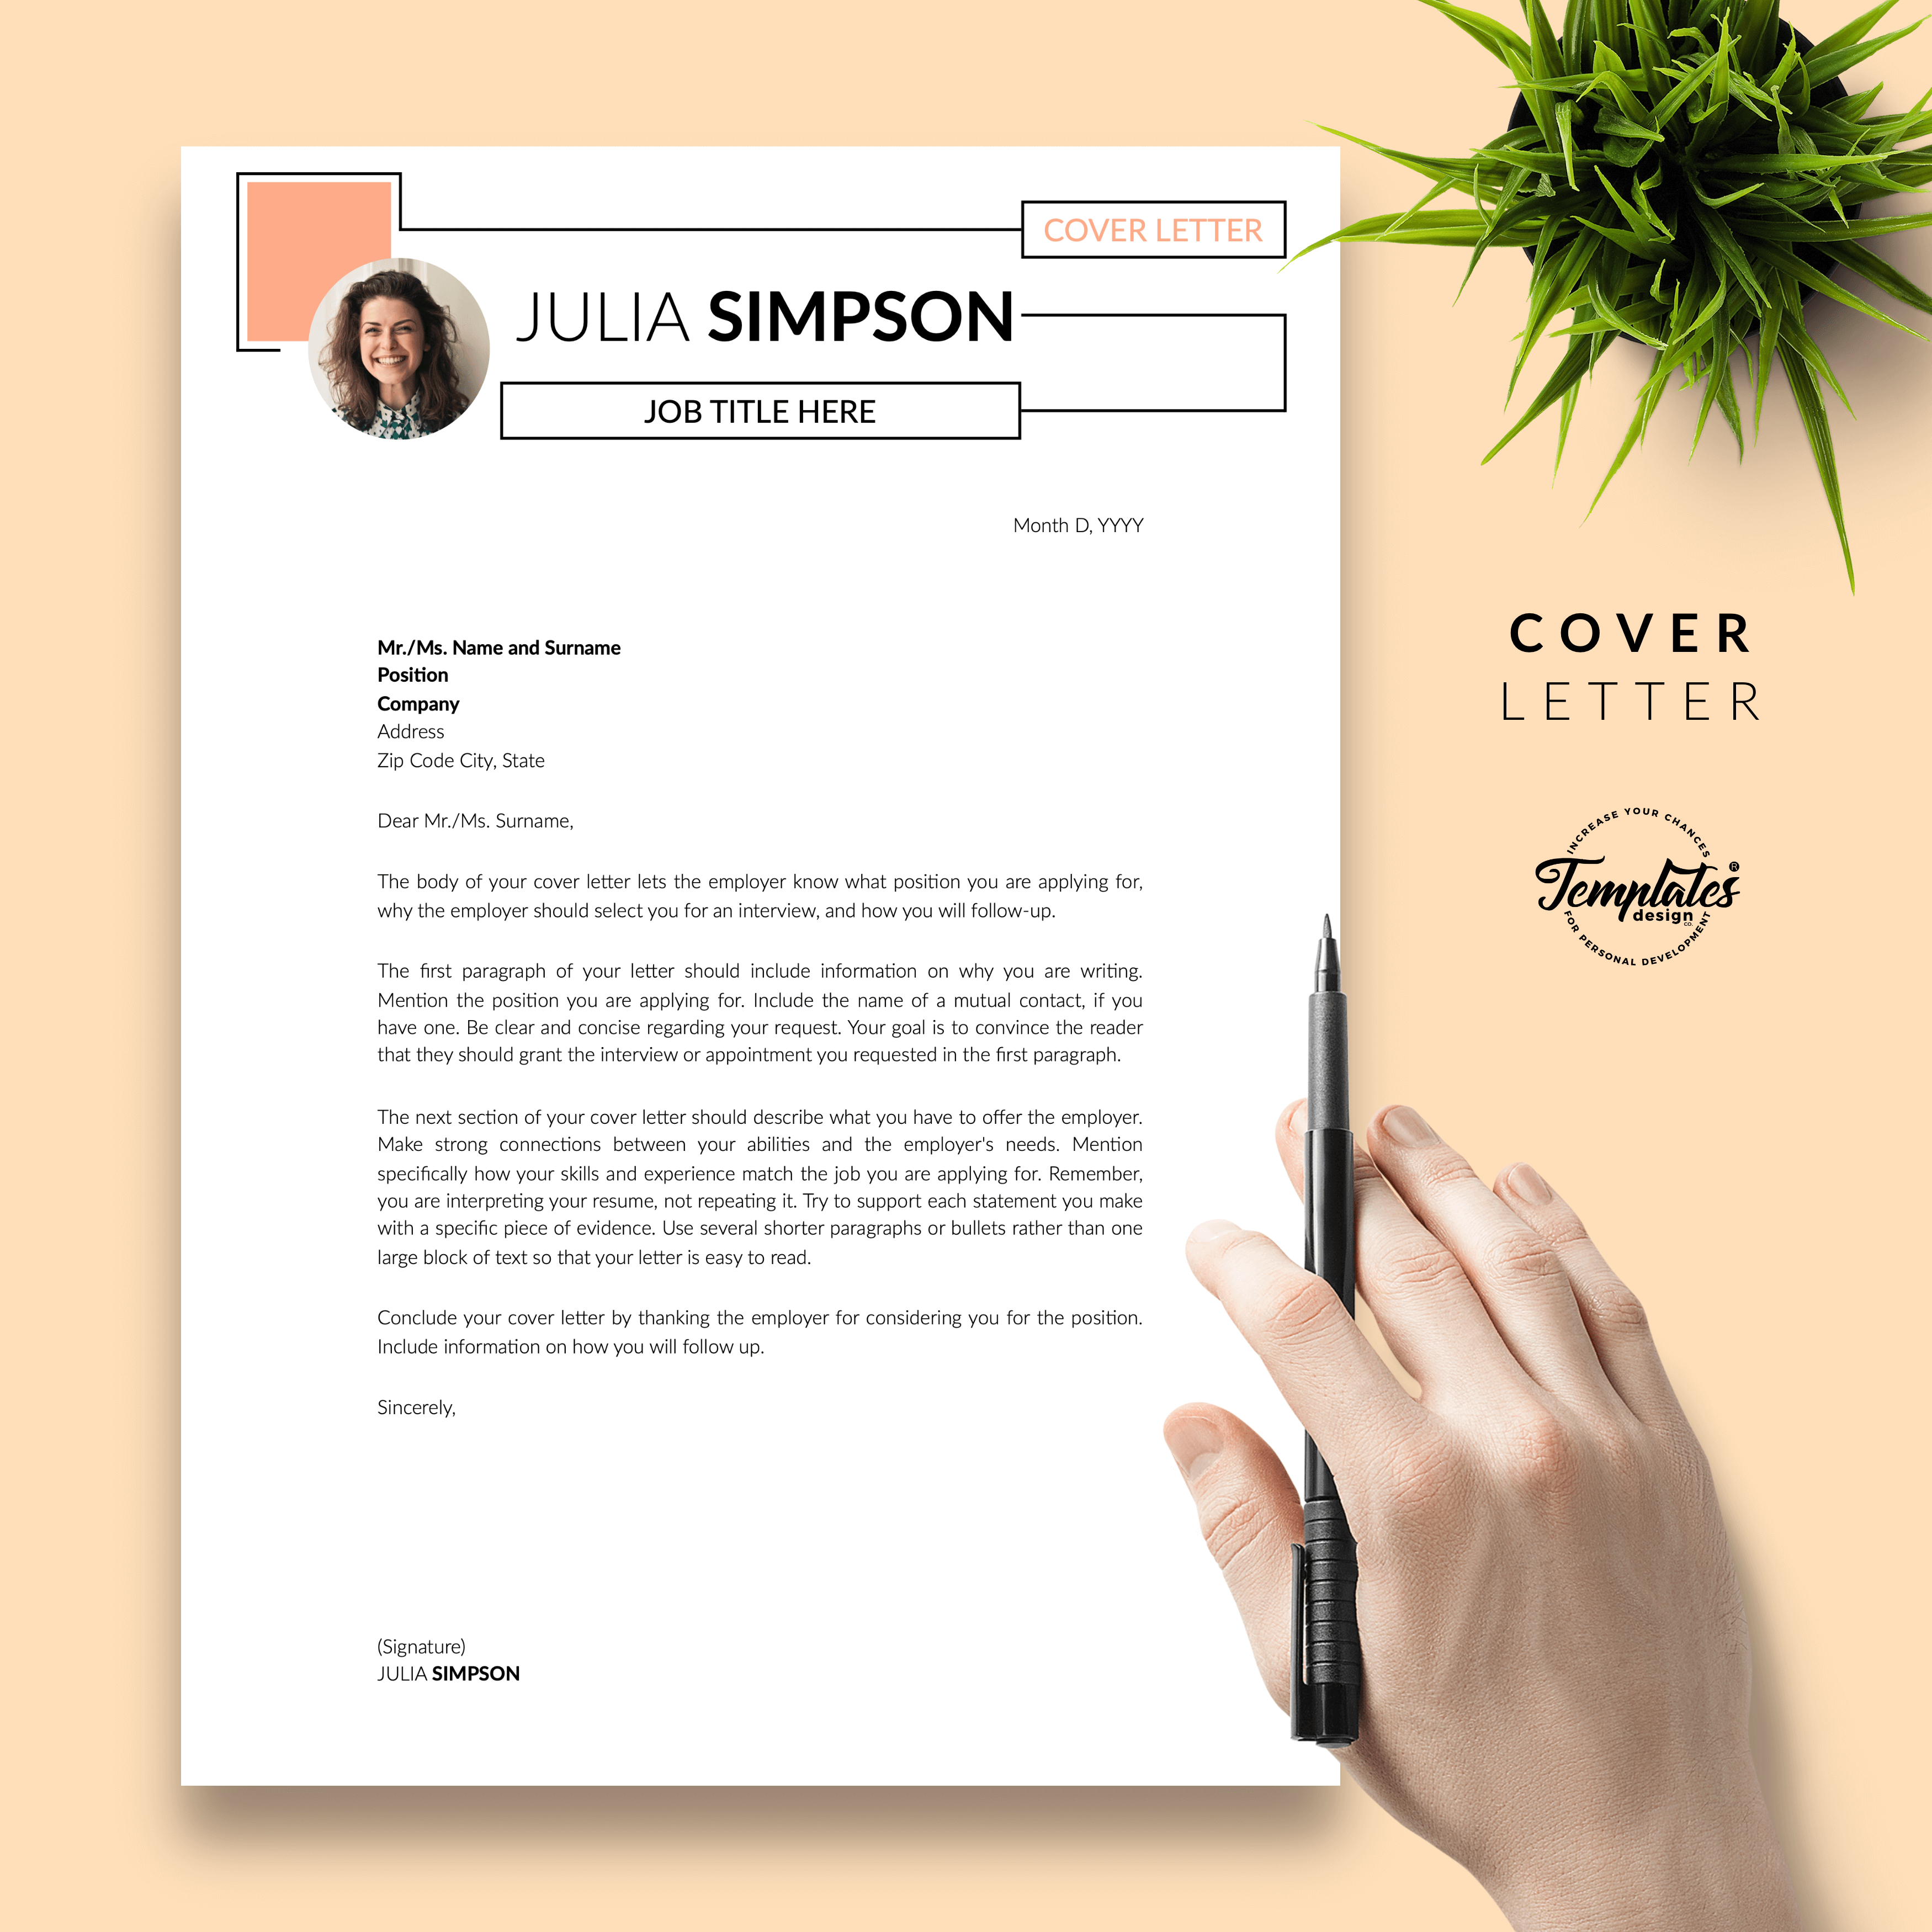 Creative Resume for Engineers - Julia Simpson 05 - Cover Letter